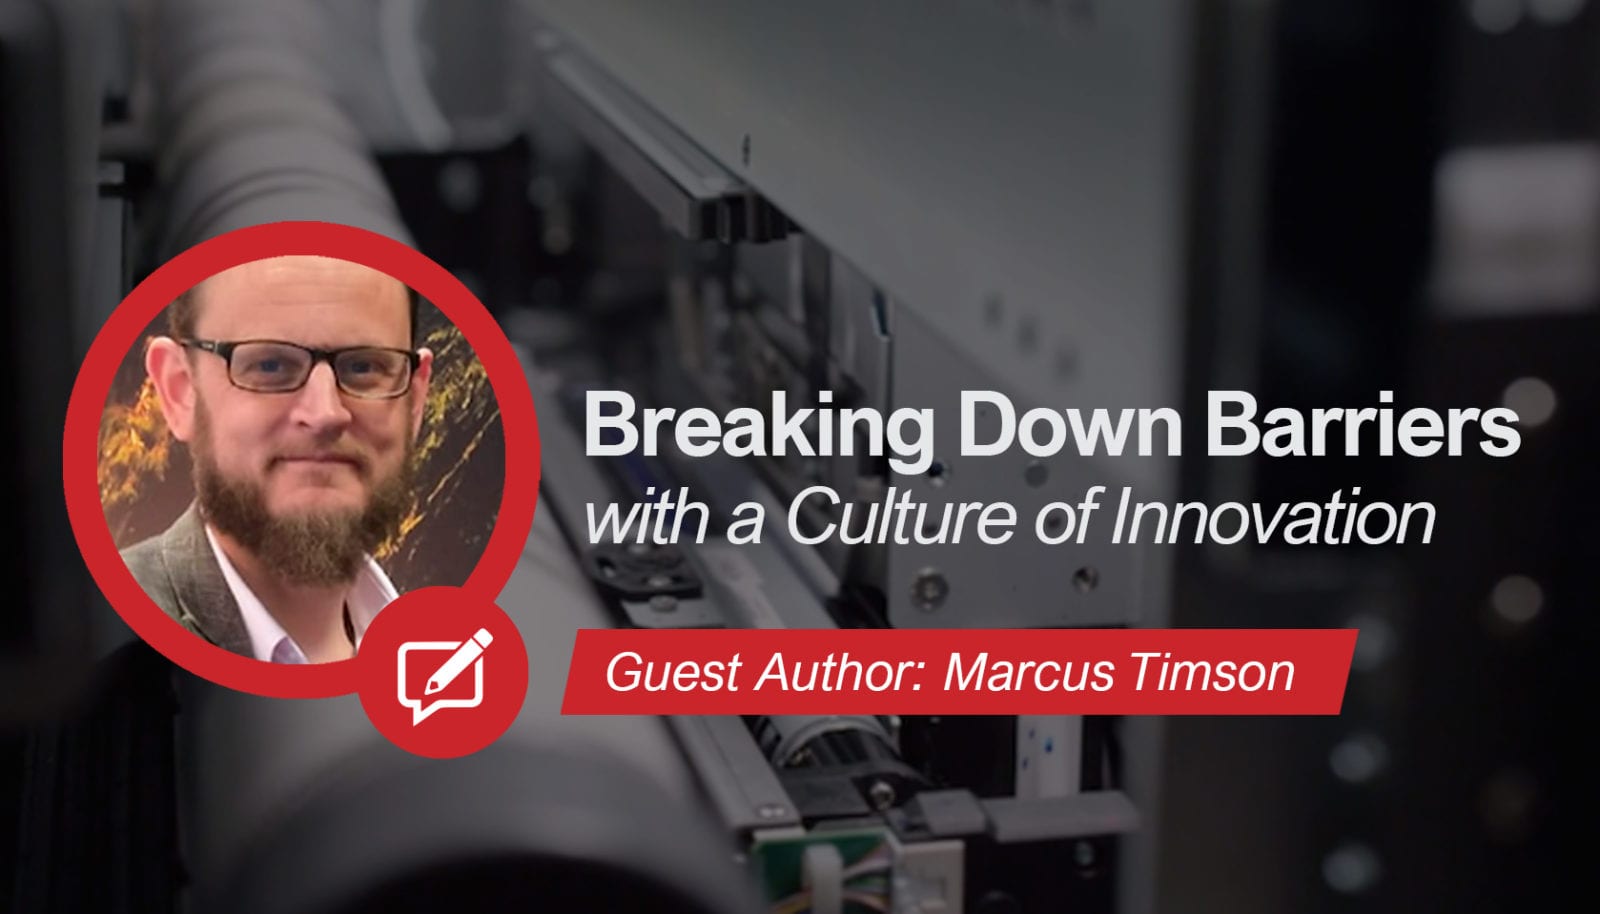 Breaking Down Barriers with a Culture of Innovation